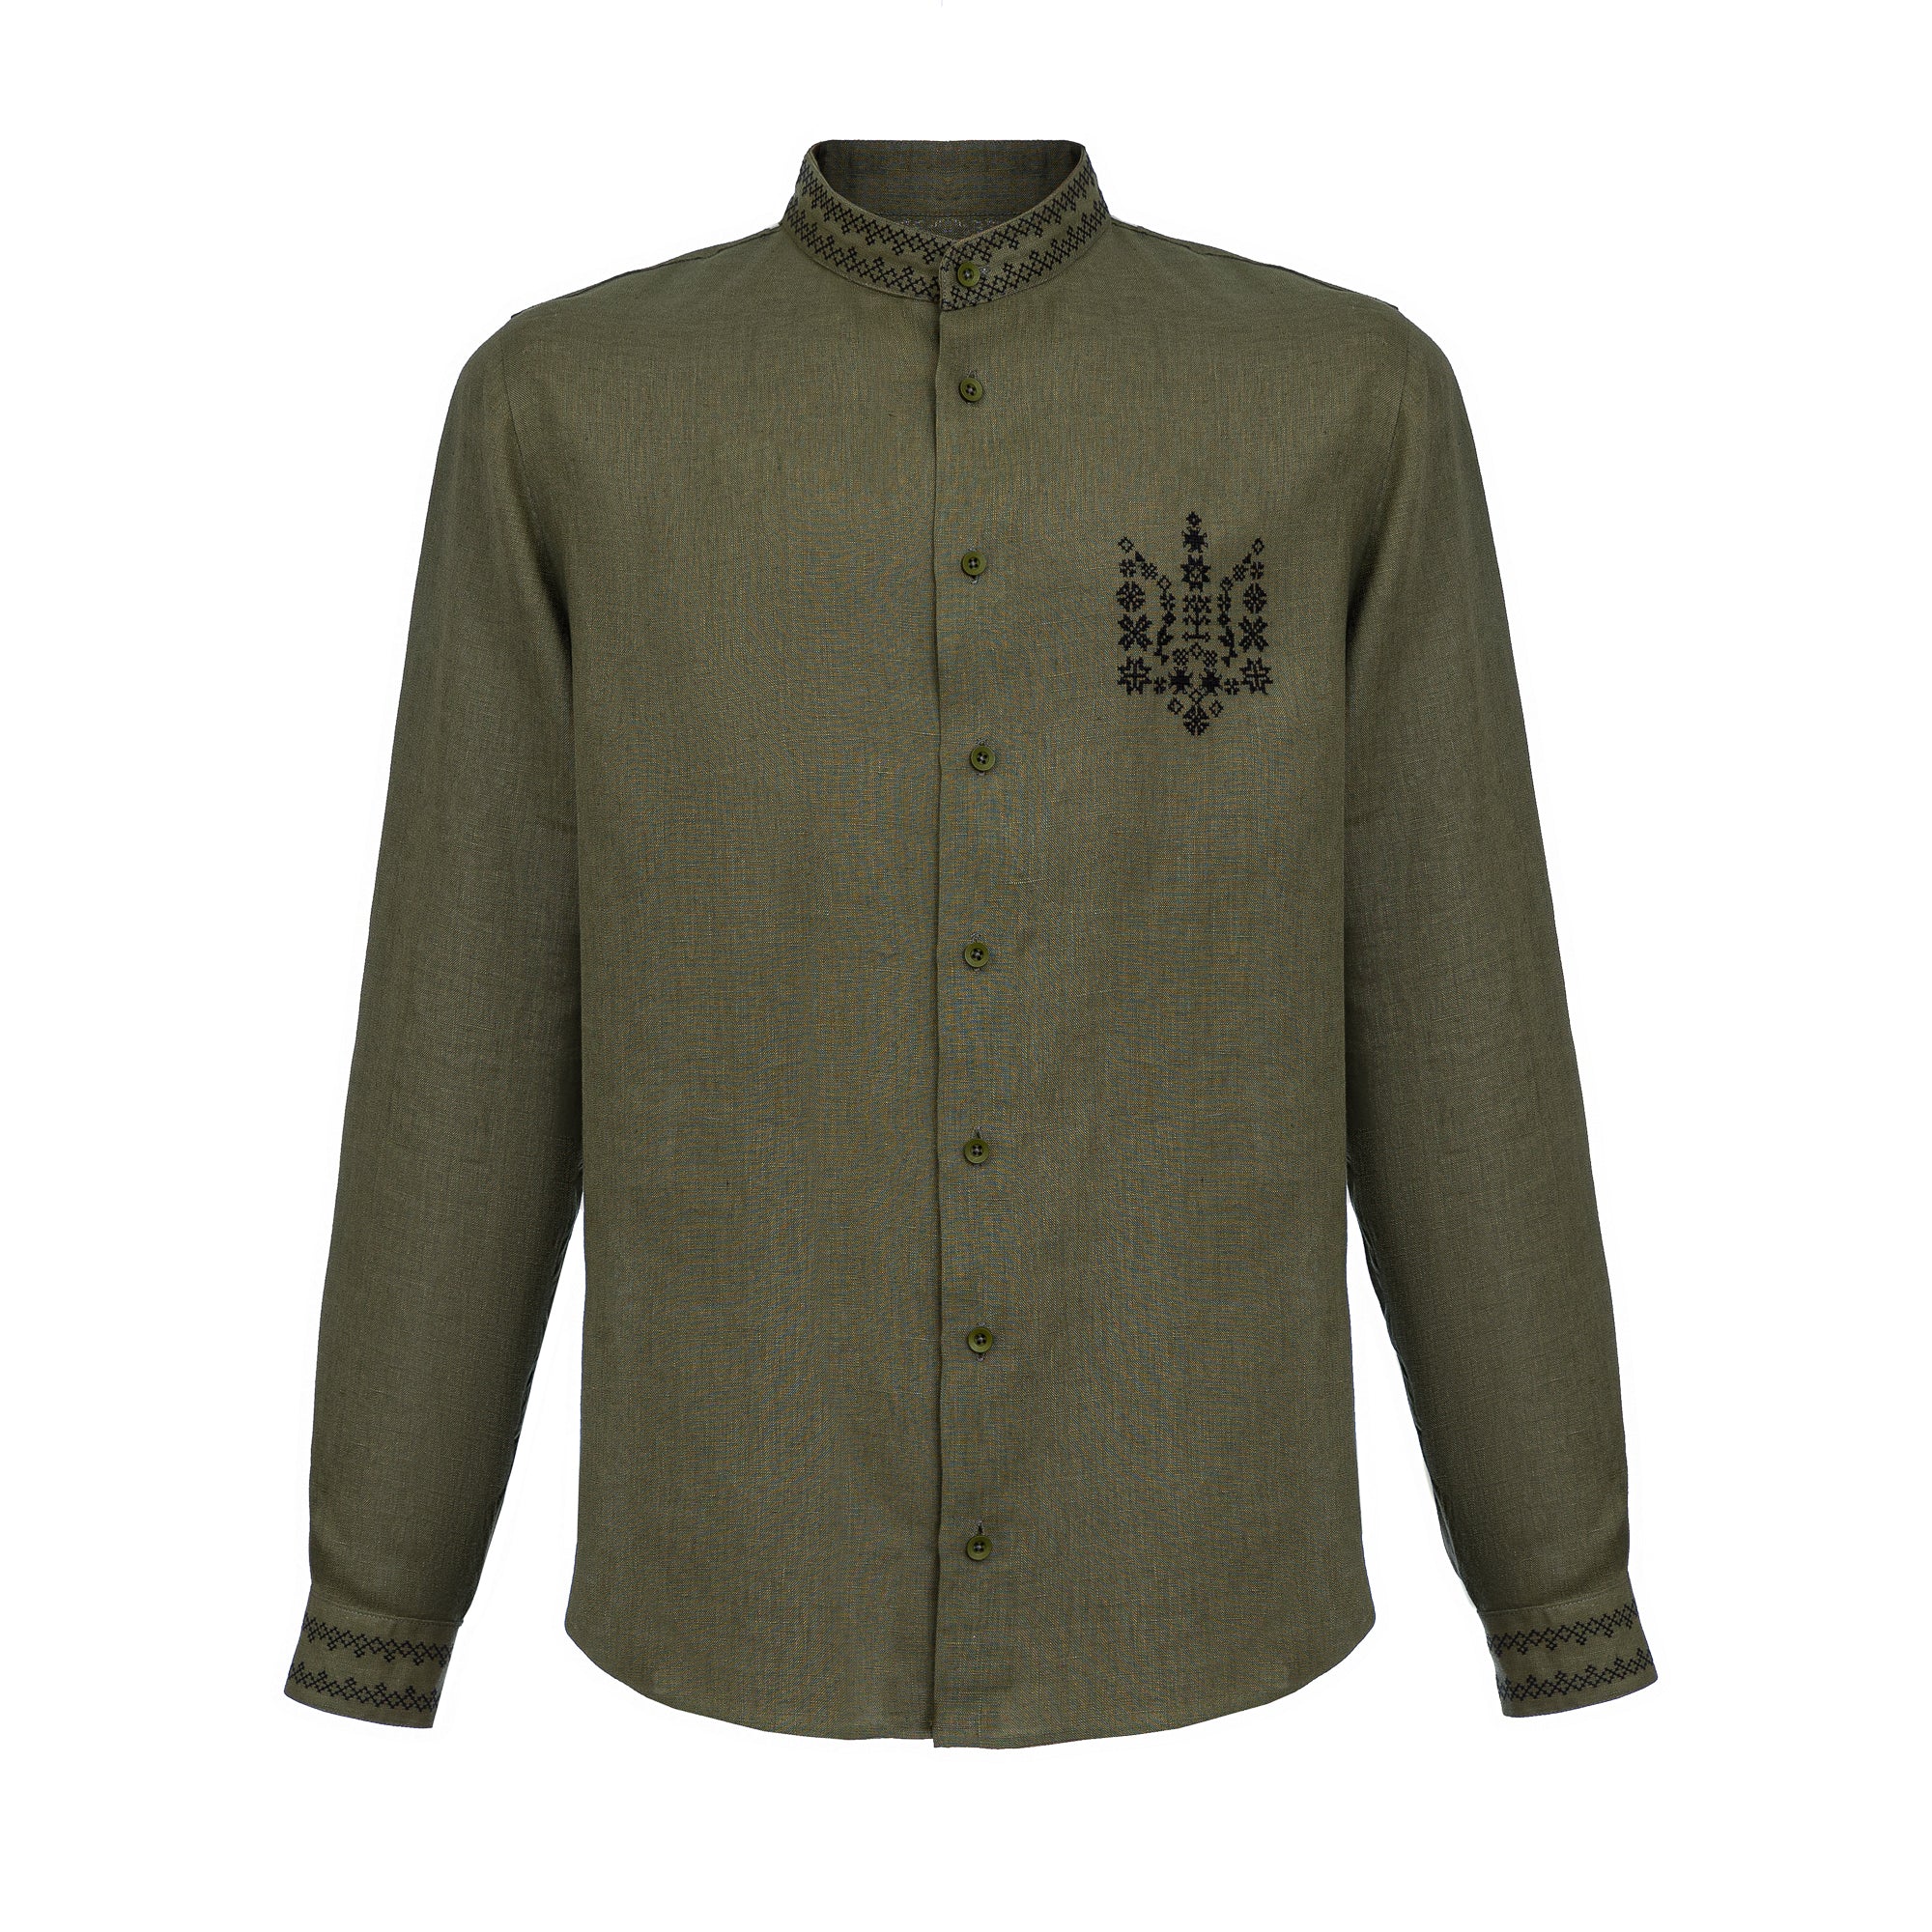 Men's shirt with embroidery "Ukrainian trident"